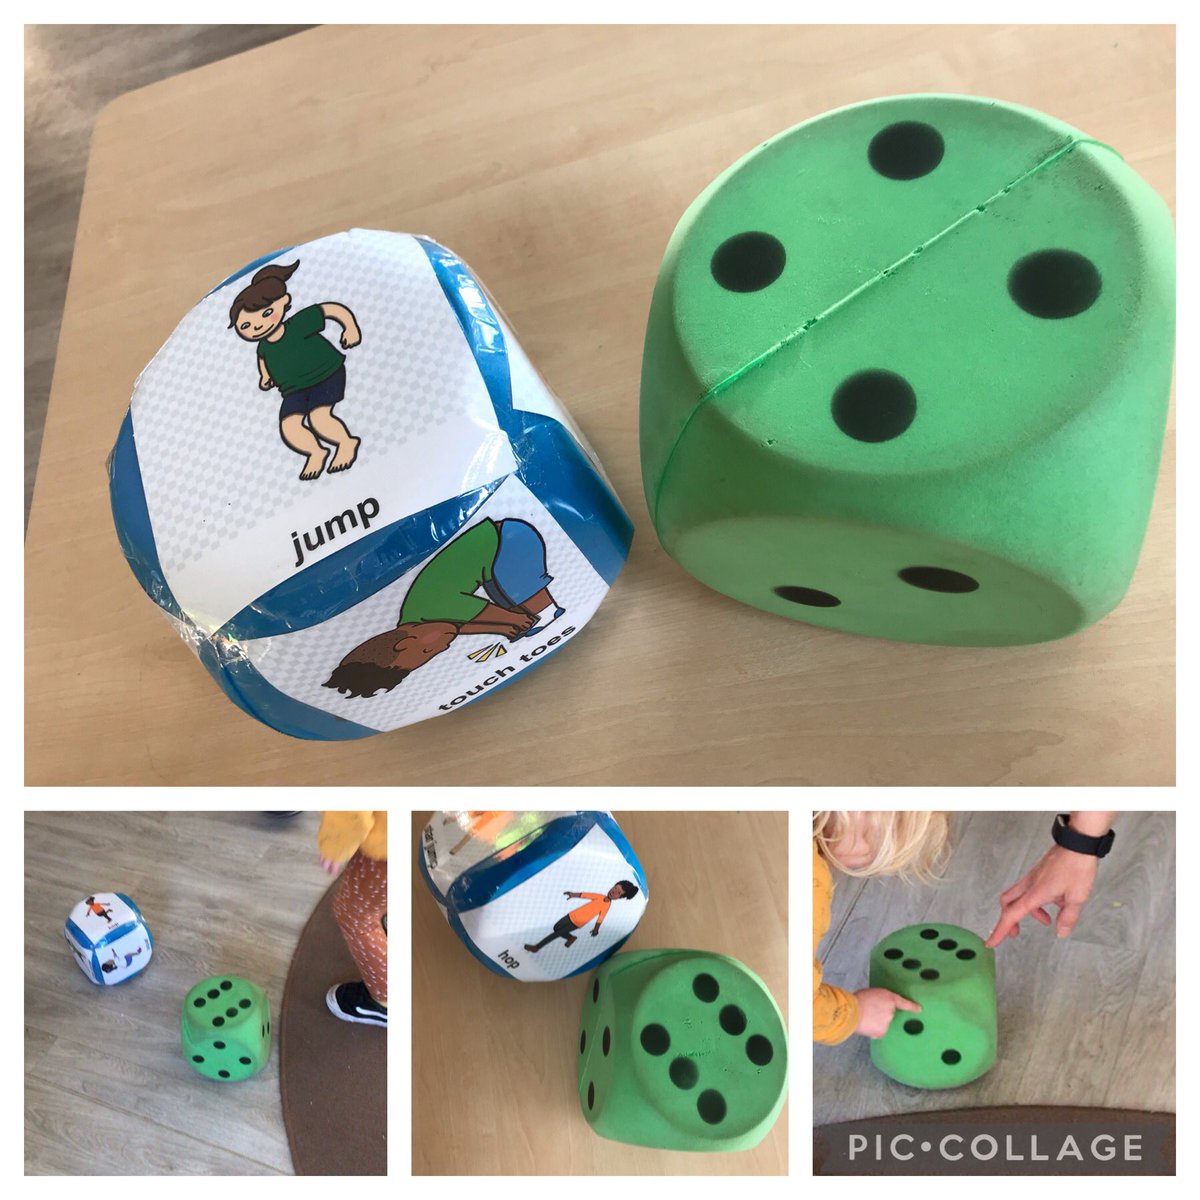 Nursery have been combining maths and physical activity with these dice. Throw the dice and do the activity for x number of times. Making early level maths fun. #MathsWeekScot @twinklresources